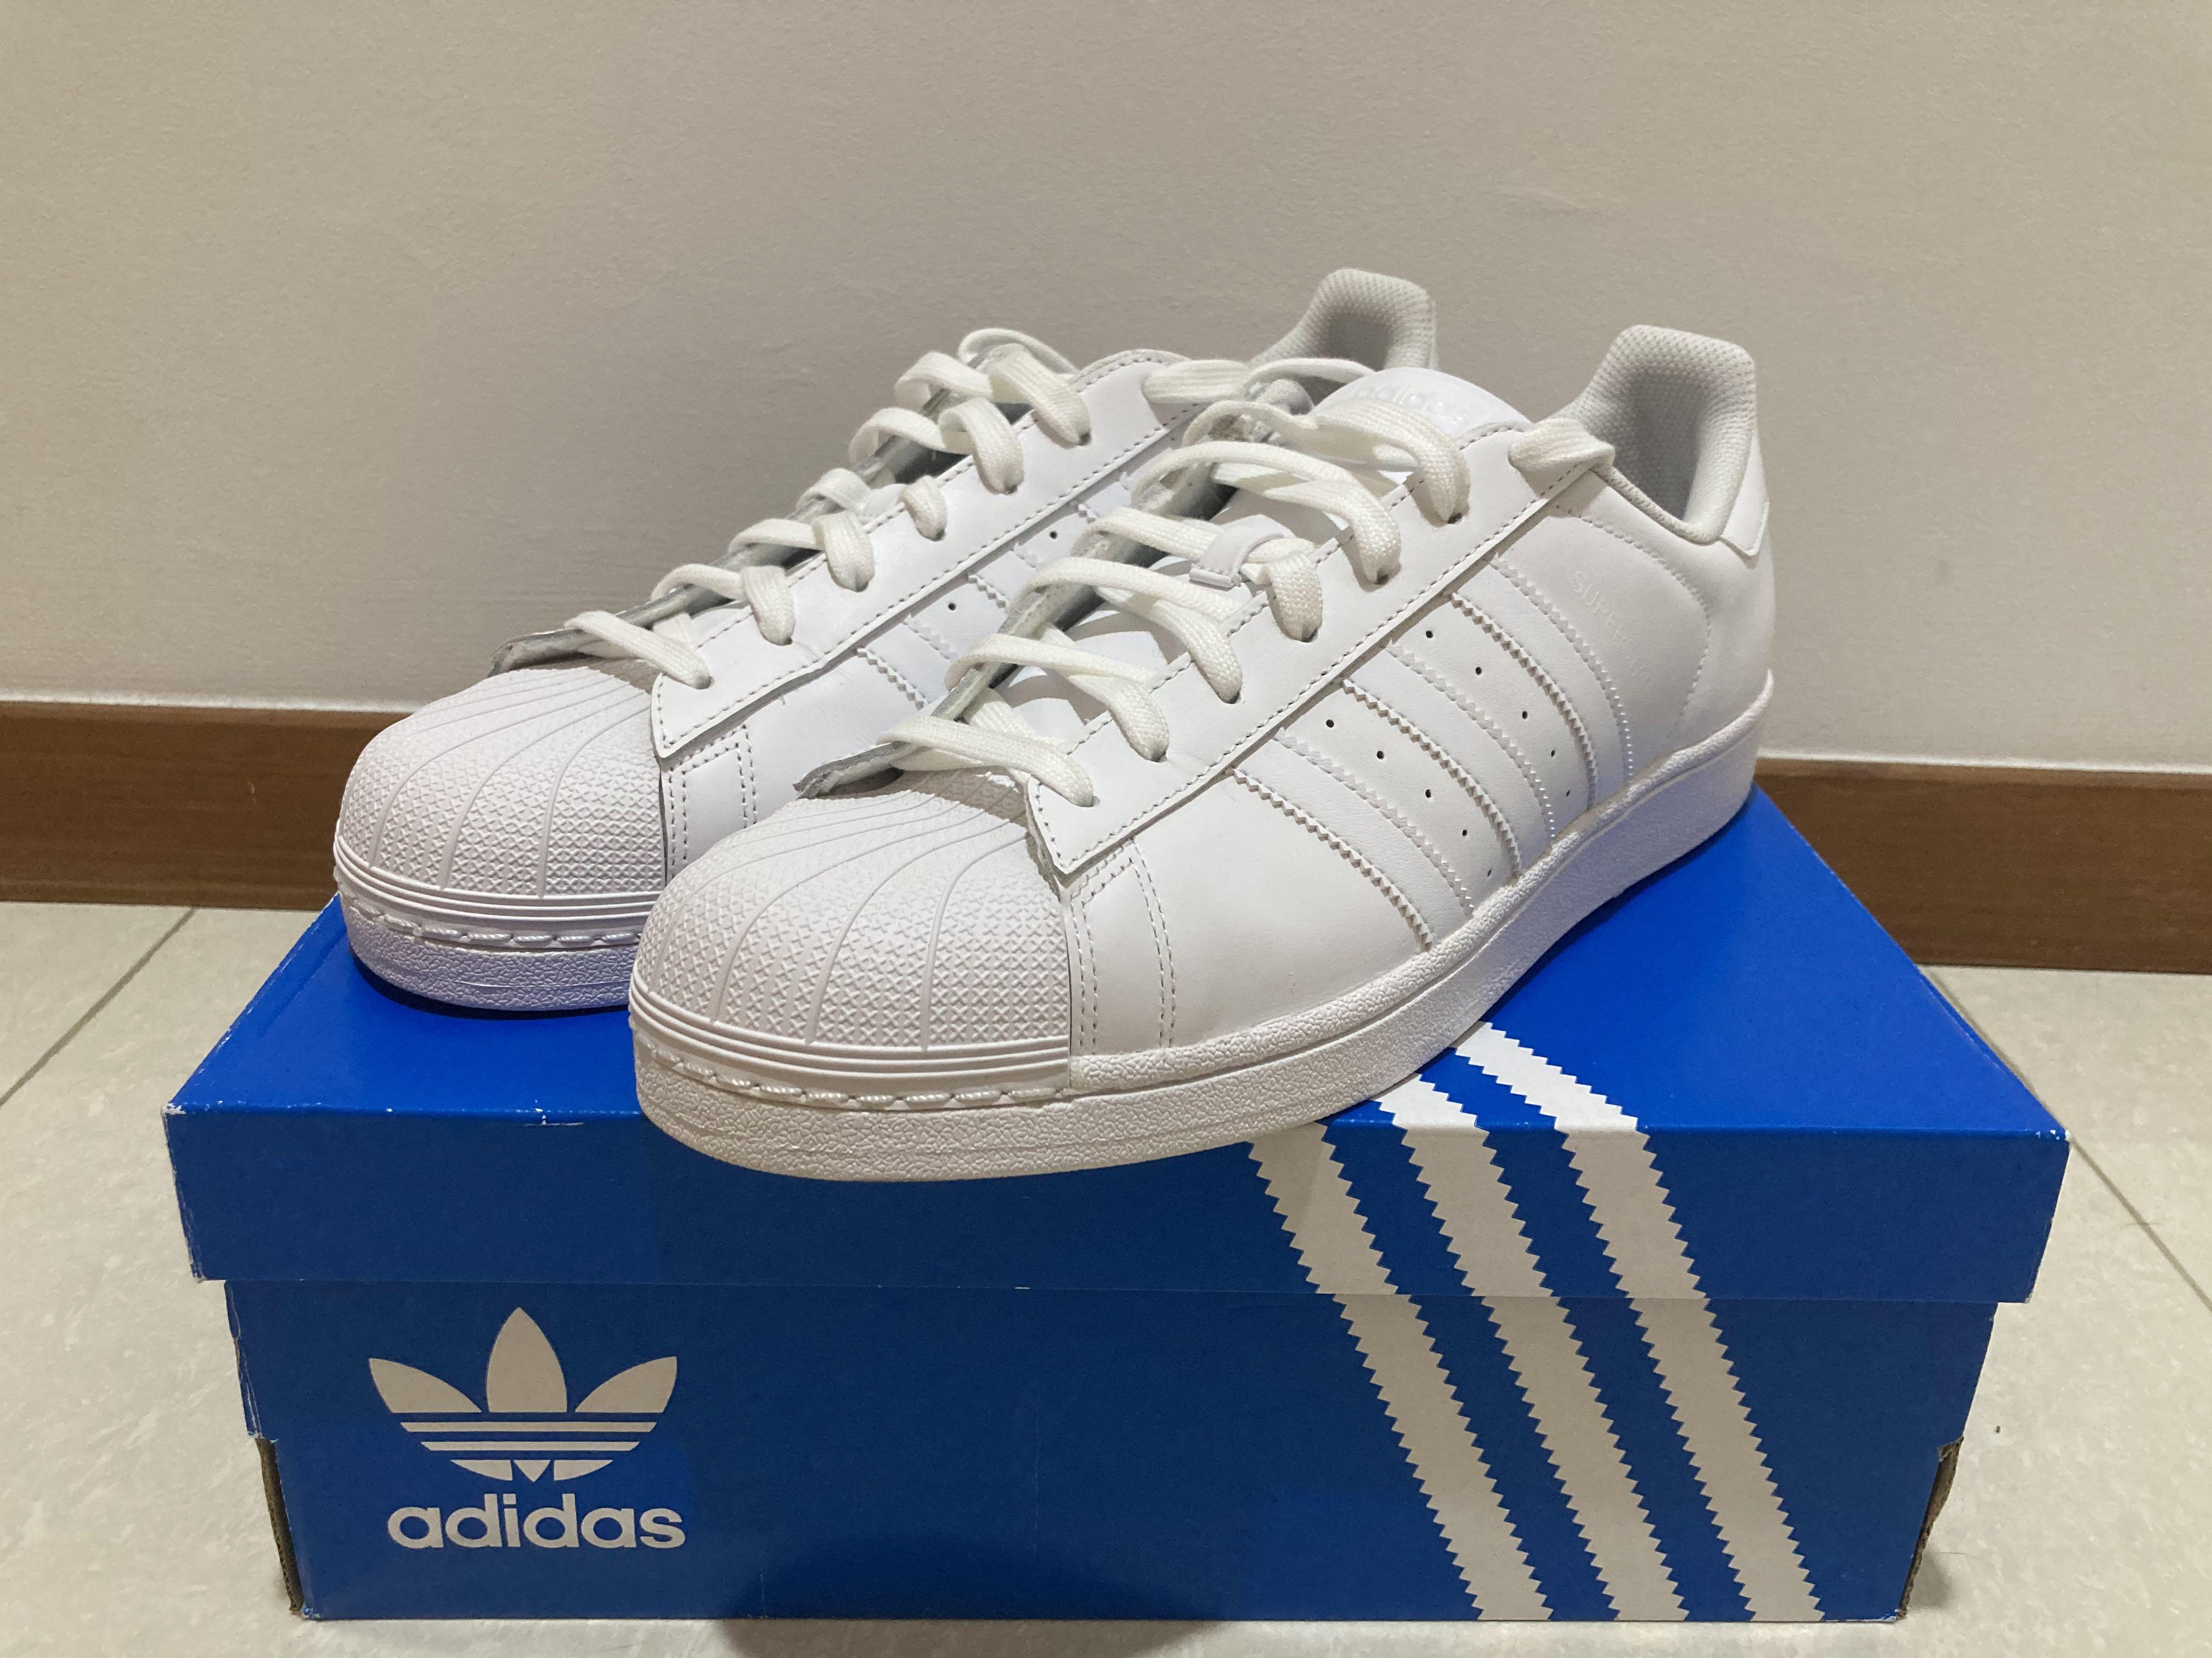 difference between adidas superstar and superstar foundation